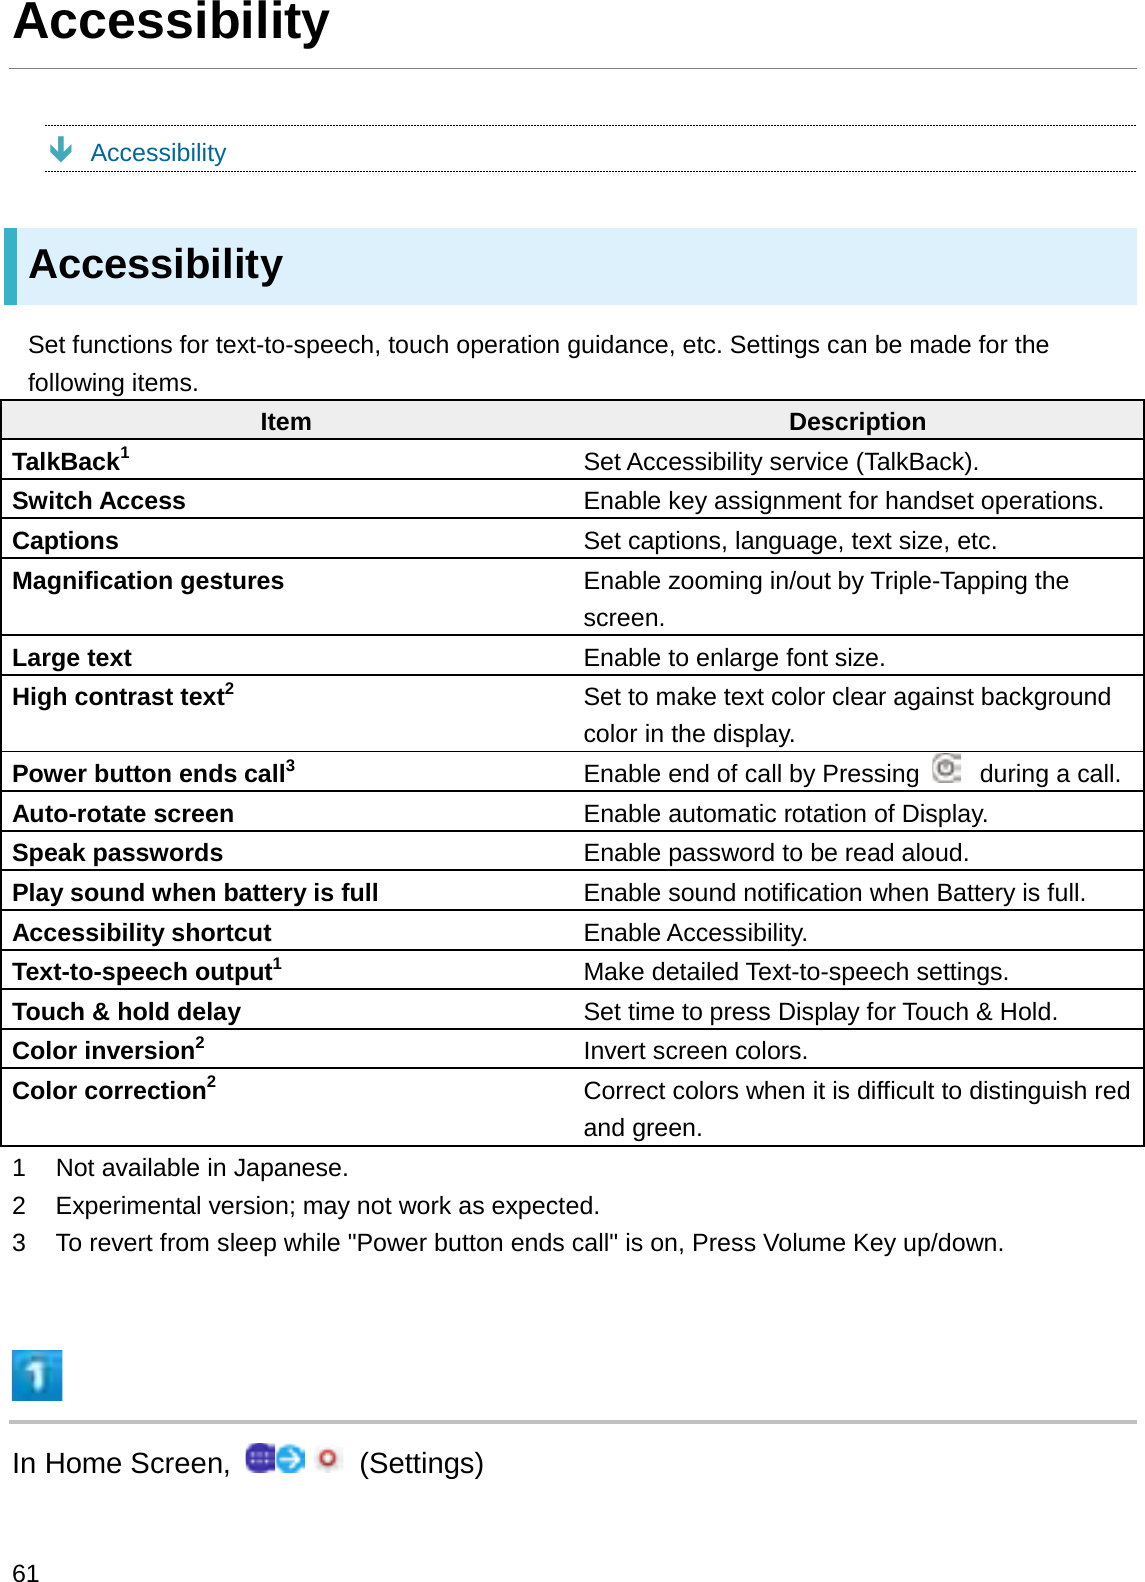 AccessibilityÐAccessibilityAccessibilitySet functions for text-to-speech, touch operation guidance, etc. Settings can be made for the following items.Item DescriptionTalkBack1Set Accessibility service (TalkBack).Switch Access Enable key assignment for handset operations.Captions Set captions, language, text size, etc.Magnification gestures Enable zooming in/out by Triple-Tapping the screen.Large text Enable to enlarge font size.High contrast text2Set to make text color clear against background color in the display.Power button ends call3Enable end of call by Pressing  during a call.Auto-rotate screen Enable automatic rotation of Display.Speak passwords Enable password to be read aloud.Play sound when battery is full Enable sound notification when Battery is full.Accessibility shortcut Enable Accessibility.Text-to-speech output1Make detailed Text-to-speech settings.Touch &amp; hold delay Set time to press Display for Touch &amp; Hold.Color inversion2Invert screen colors.Color correction2Correct colors when it is difficult to distinguish red and green.1 Not available in Japanese.2 Experimental version; may not work as expected.3 To revert from sleep while &quot;Power button ends call&quot; is on, Press Volume Key up/down.In Home Screen,  (Settings)61